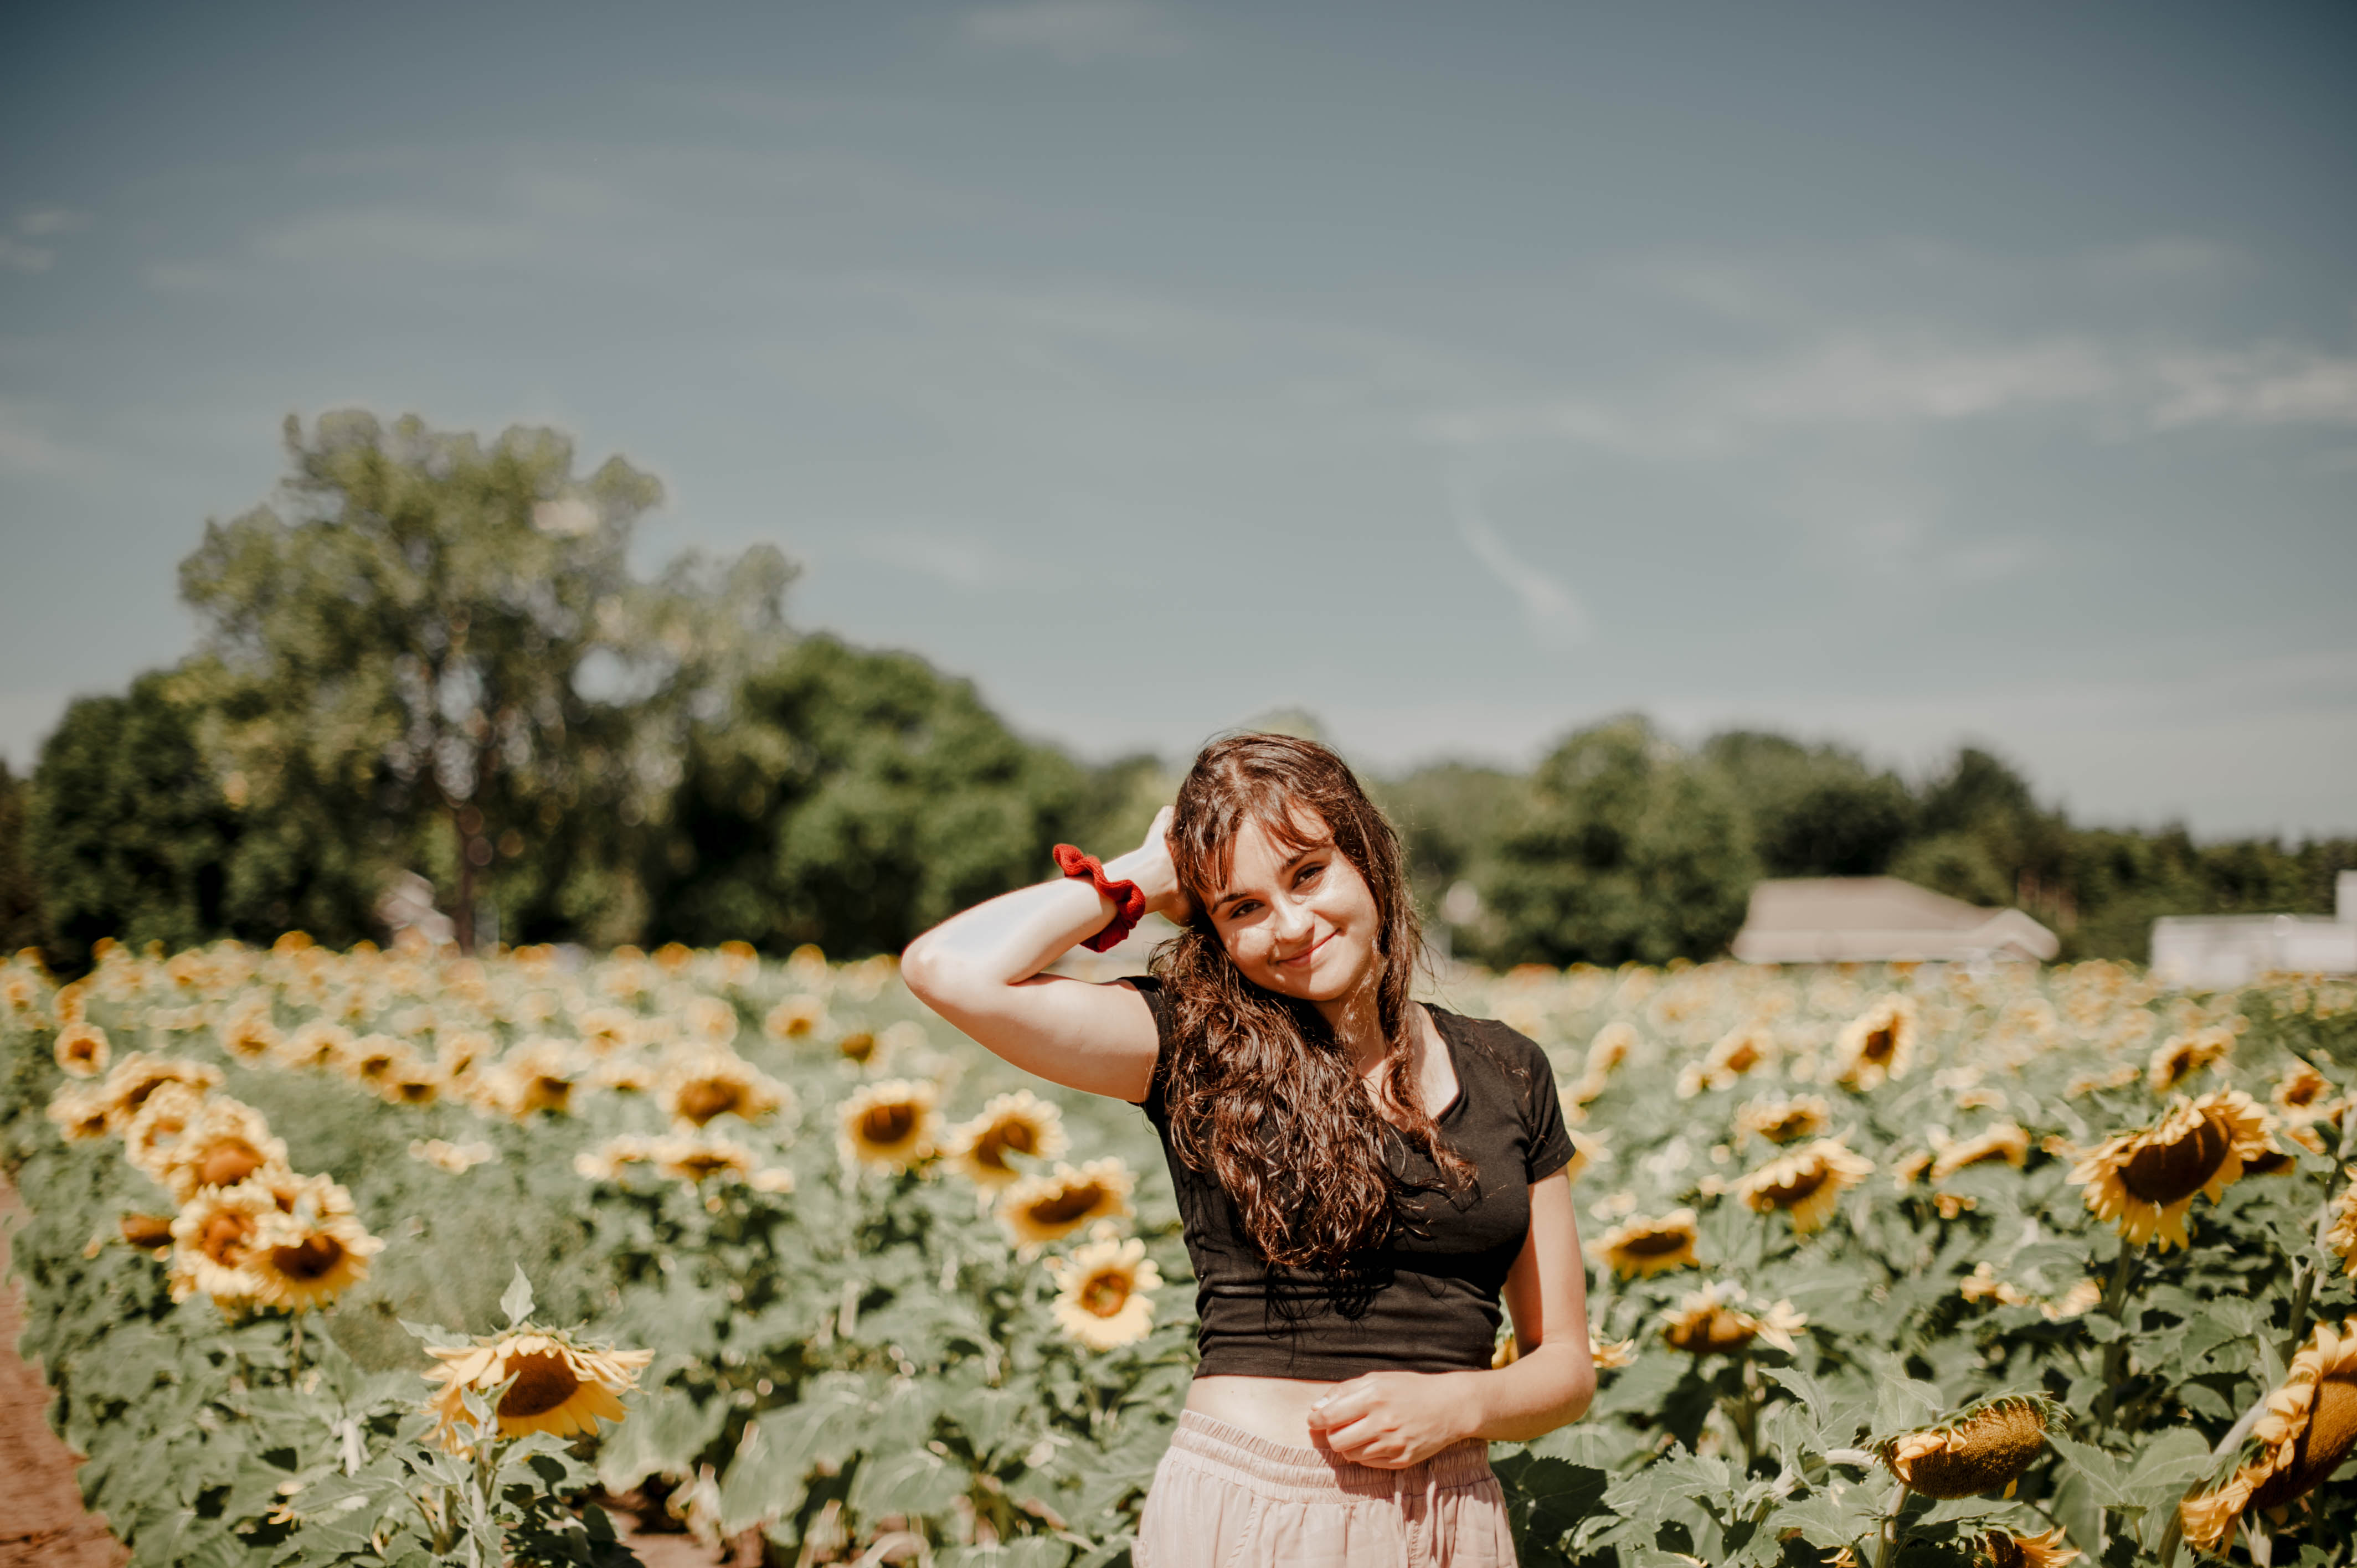 A picture of a woman with long curly brown hair smiling in a sunflower field.